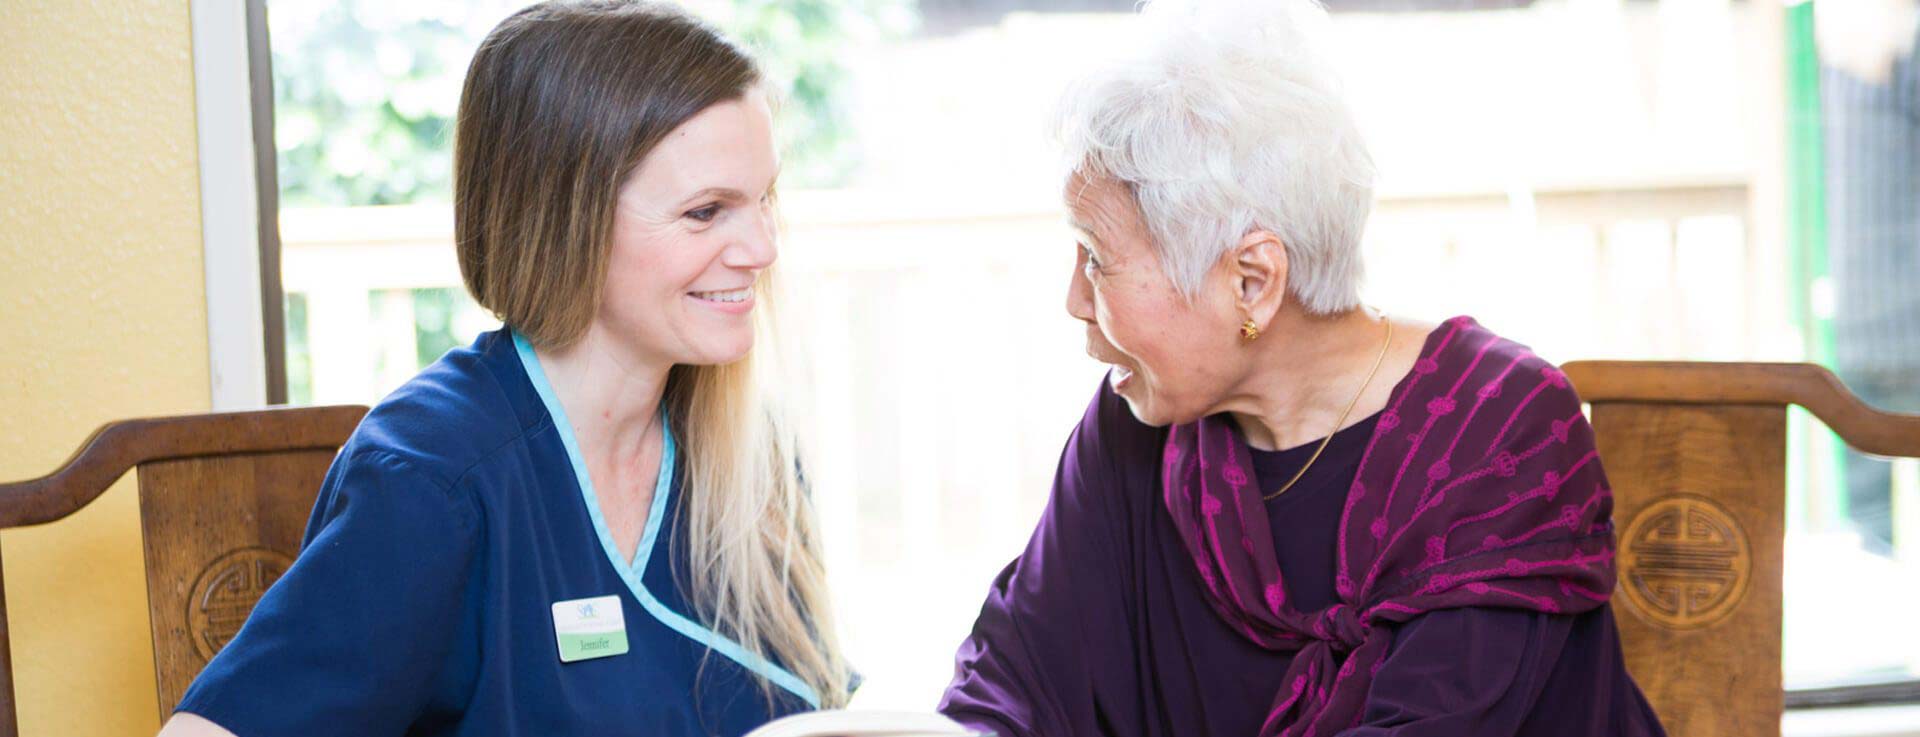 Caregiver talking with elderly woman